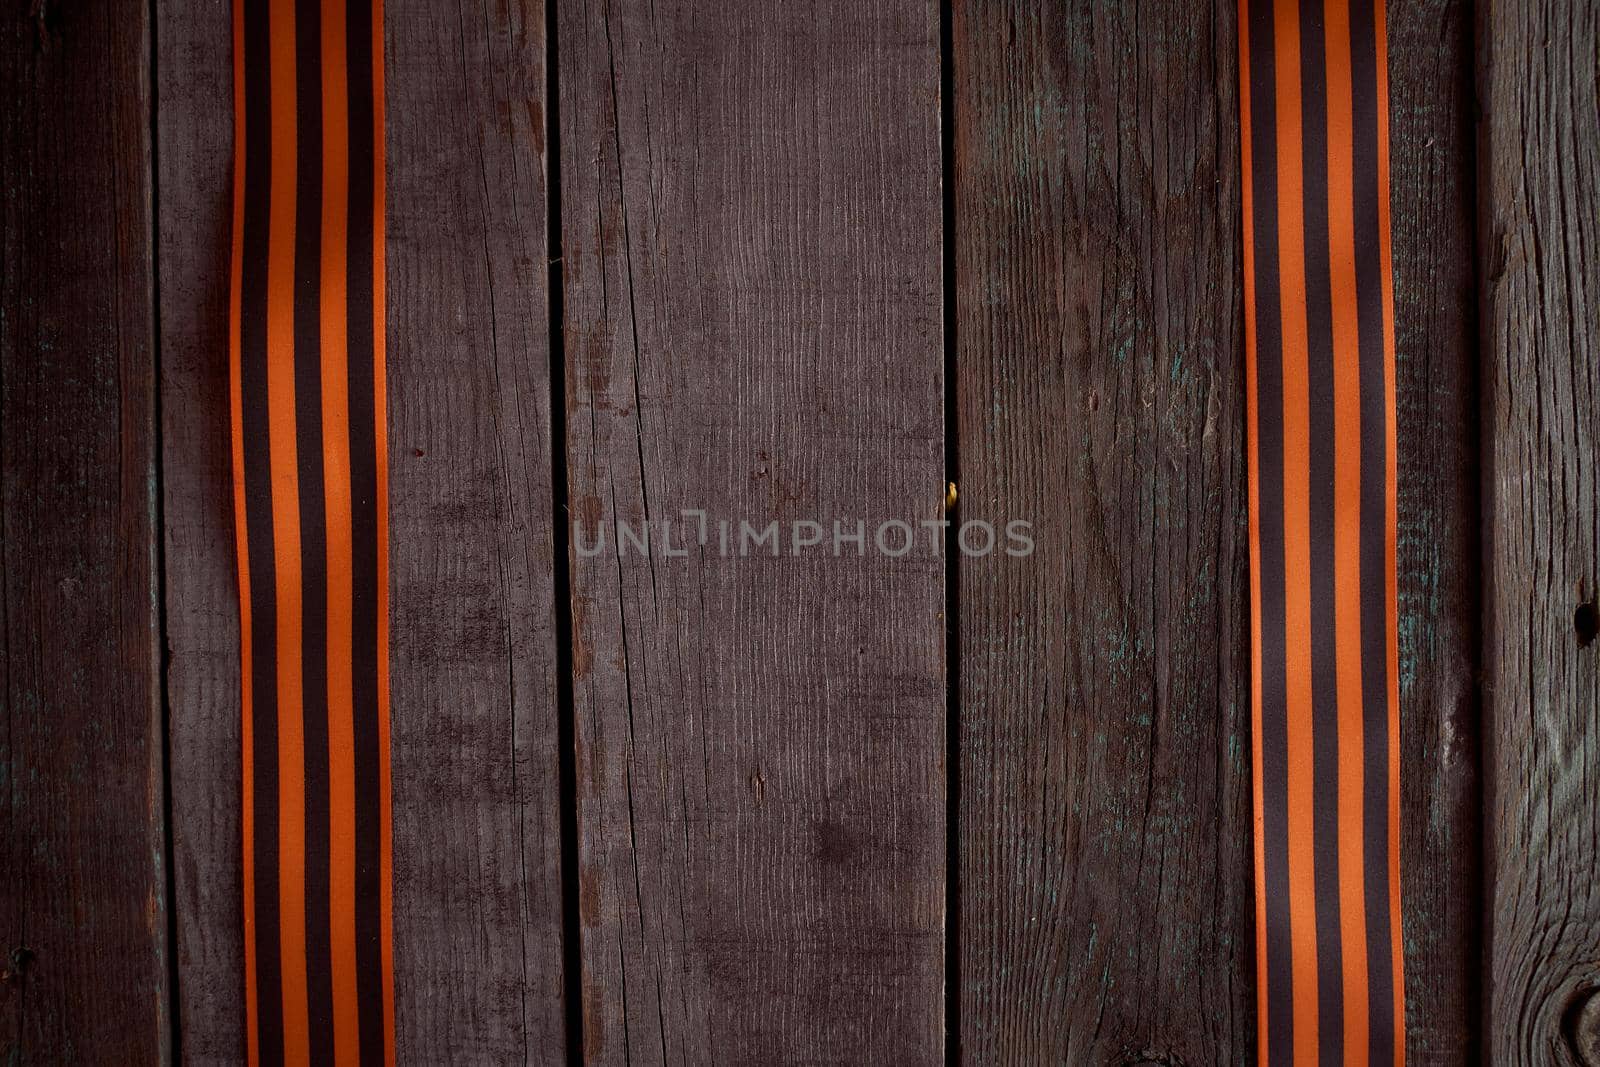 Two St. George ribbons on a wooden table. High quality photo